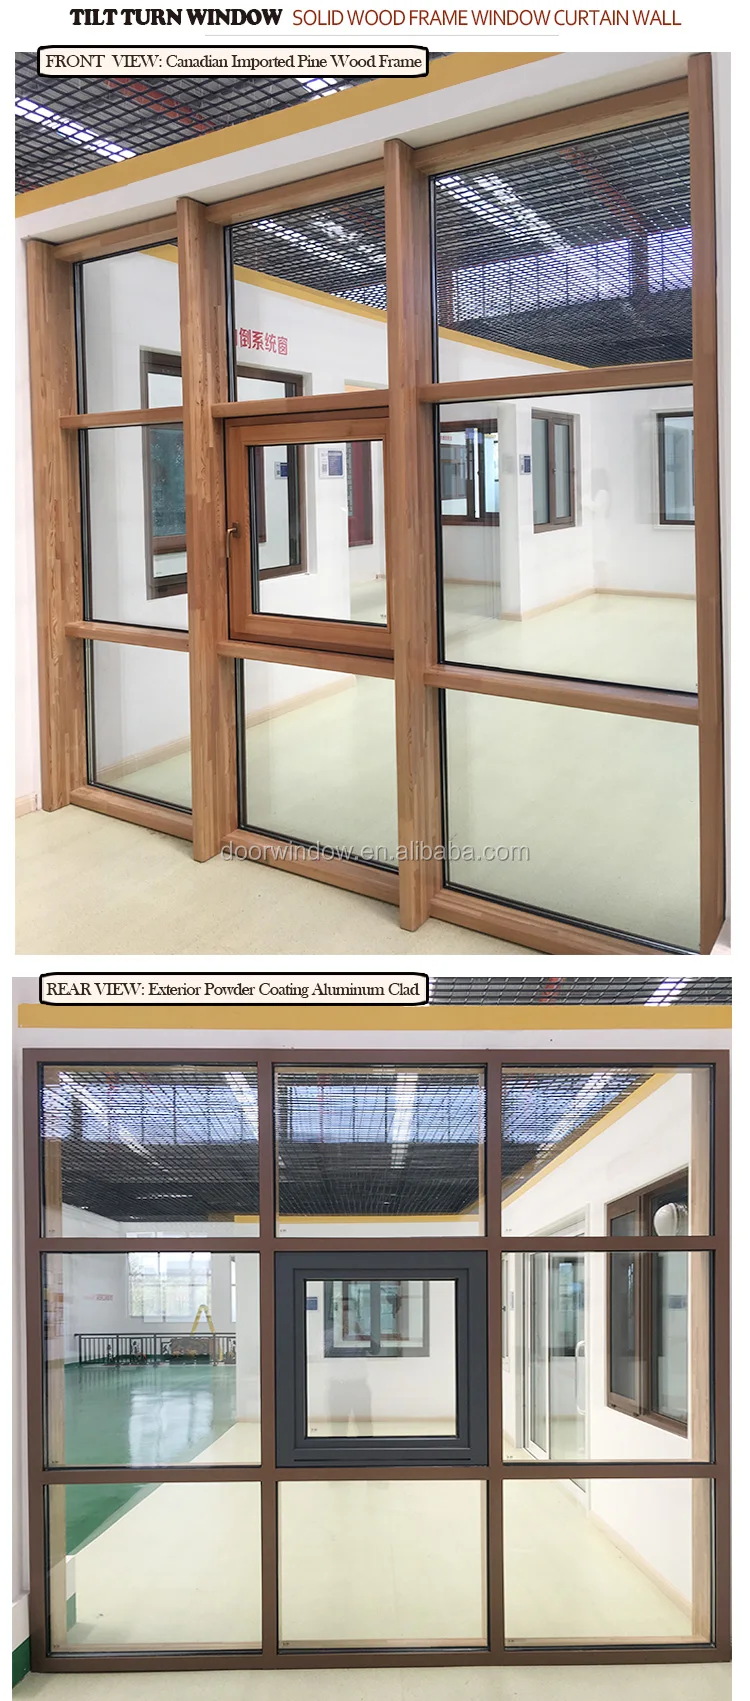 Hot Sale Solid Wood Frame and Aluminium Tilt and Turn Window Come With Double Glazing and Roto Hardware